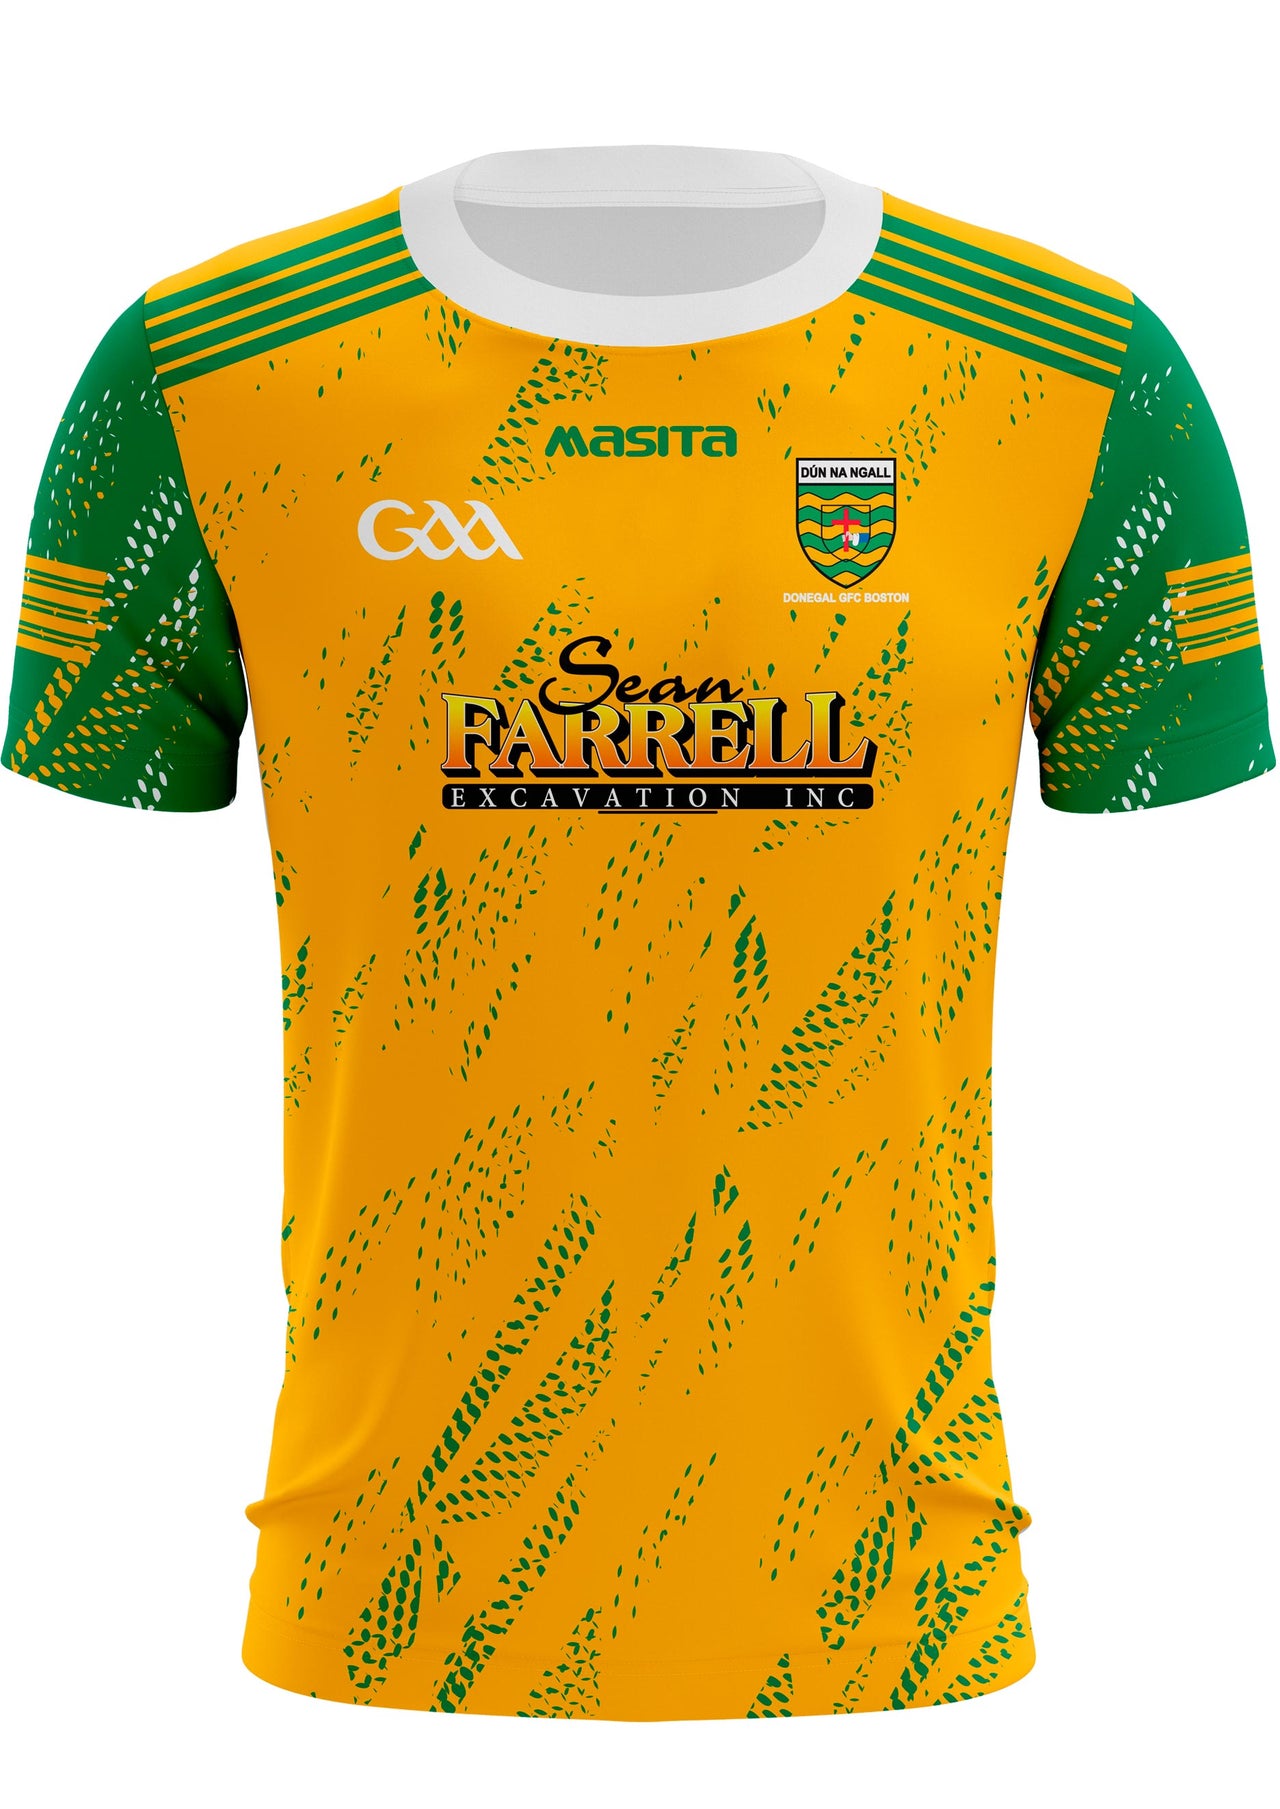 Donegal Boston Intermediate Team Jersey Player Fit Adult